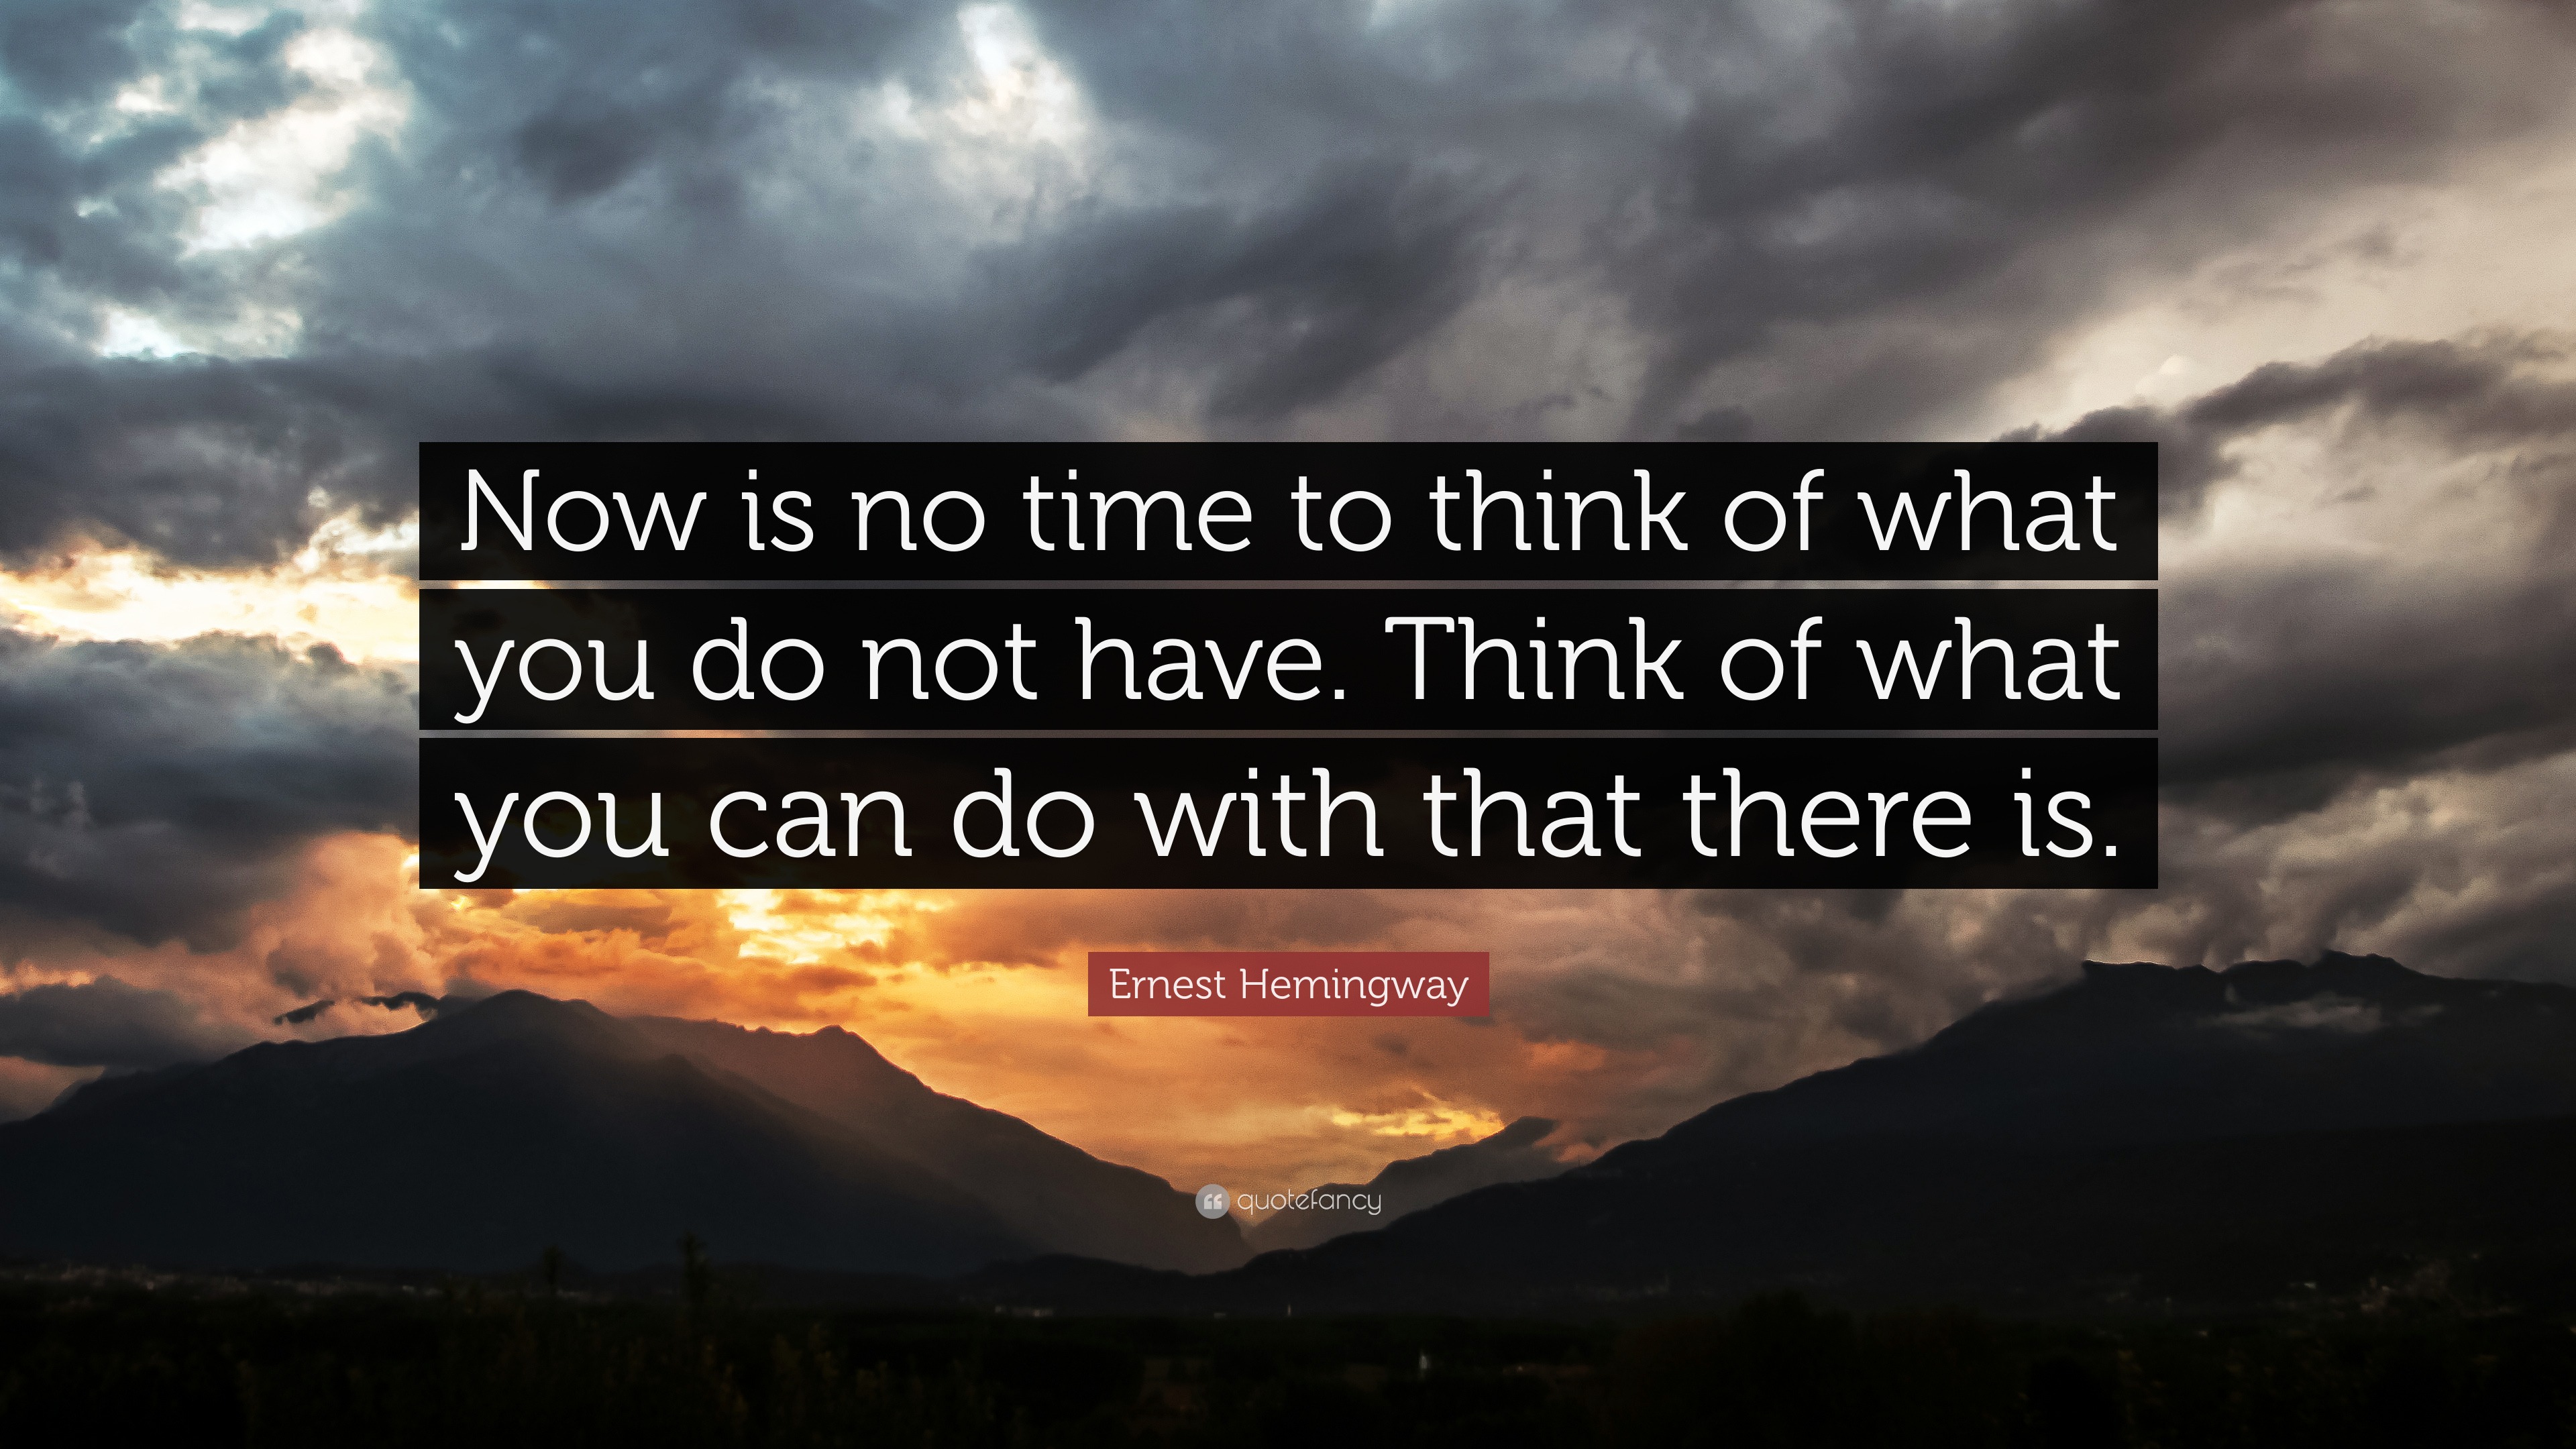 https://quotefancy.com/media/wallpaper/3840x2160/2043218-Ernest-Hemingway-Quote-Now-is-no-time-to-think-of-what-you-do-not.jpg